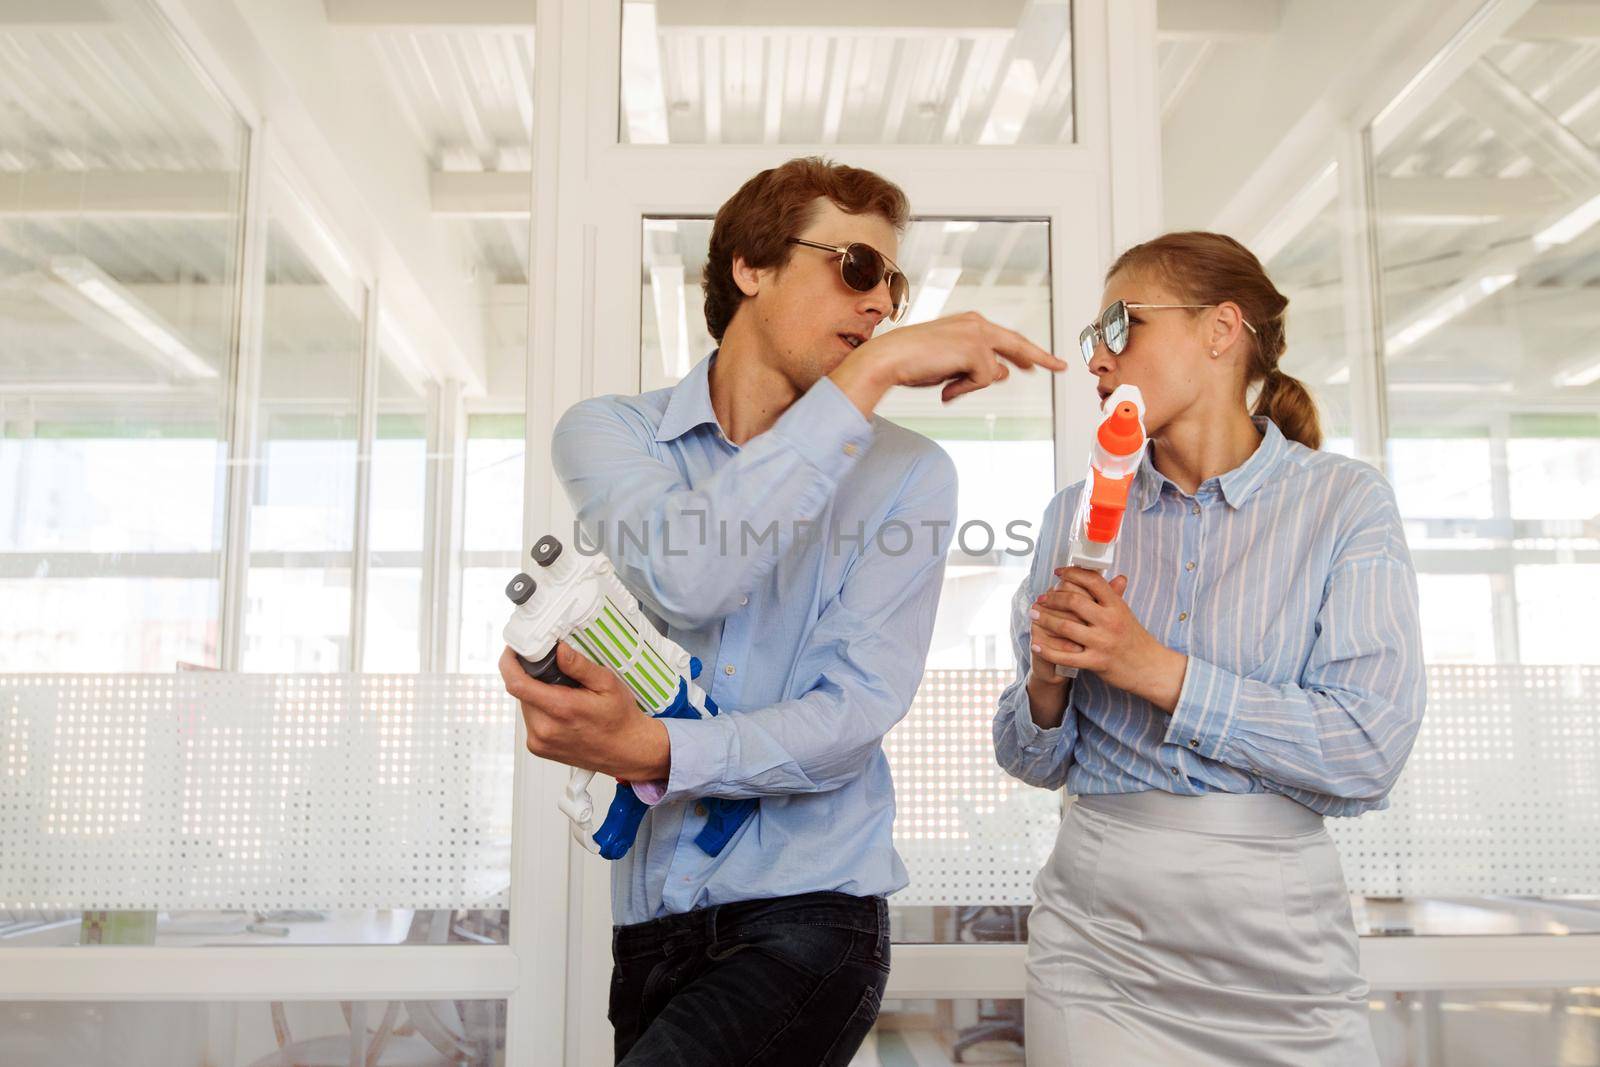 Stylish modern woman and man in sunglasses having fun in office with toy plastic guns